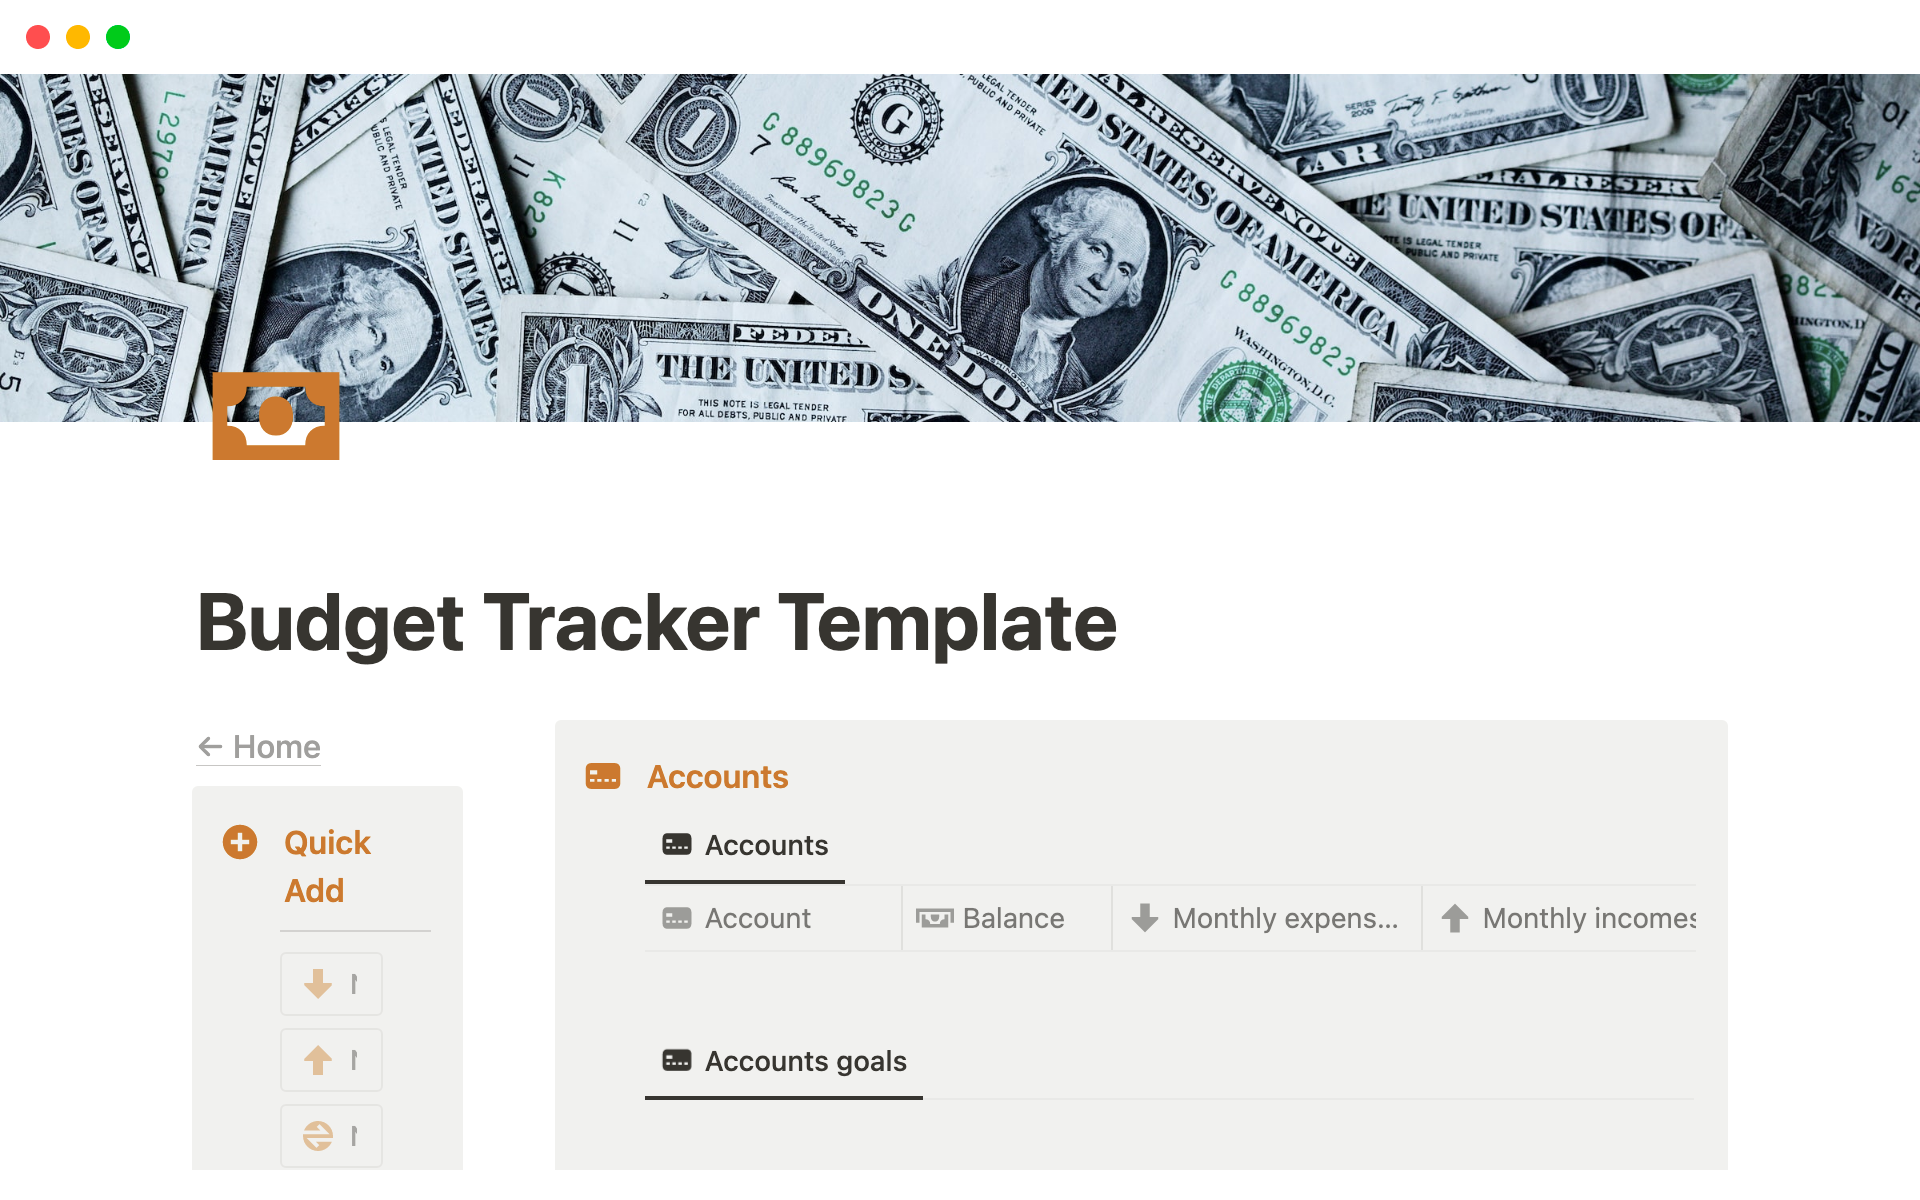 Track your expenses and incomes across multiple money accounts